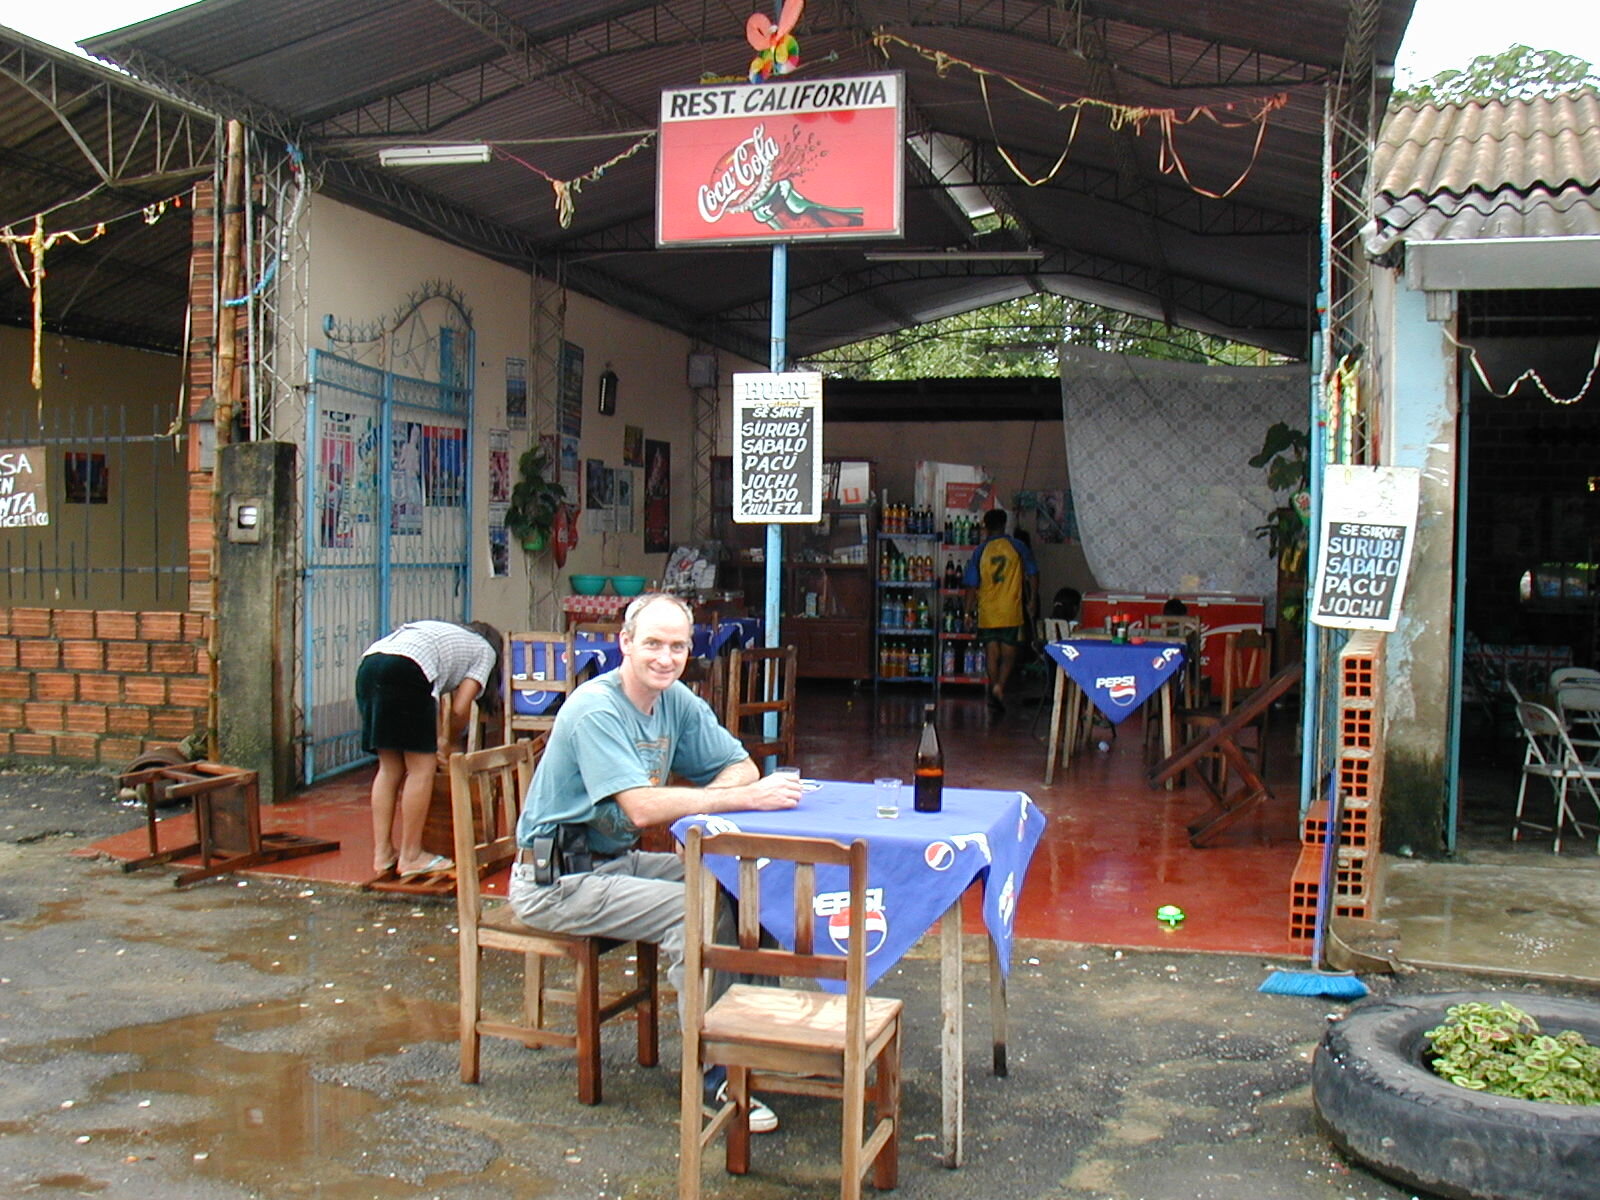 The nearest I have been to California – roadside refreshments in Bolivia.